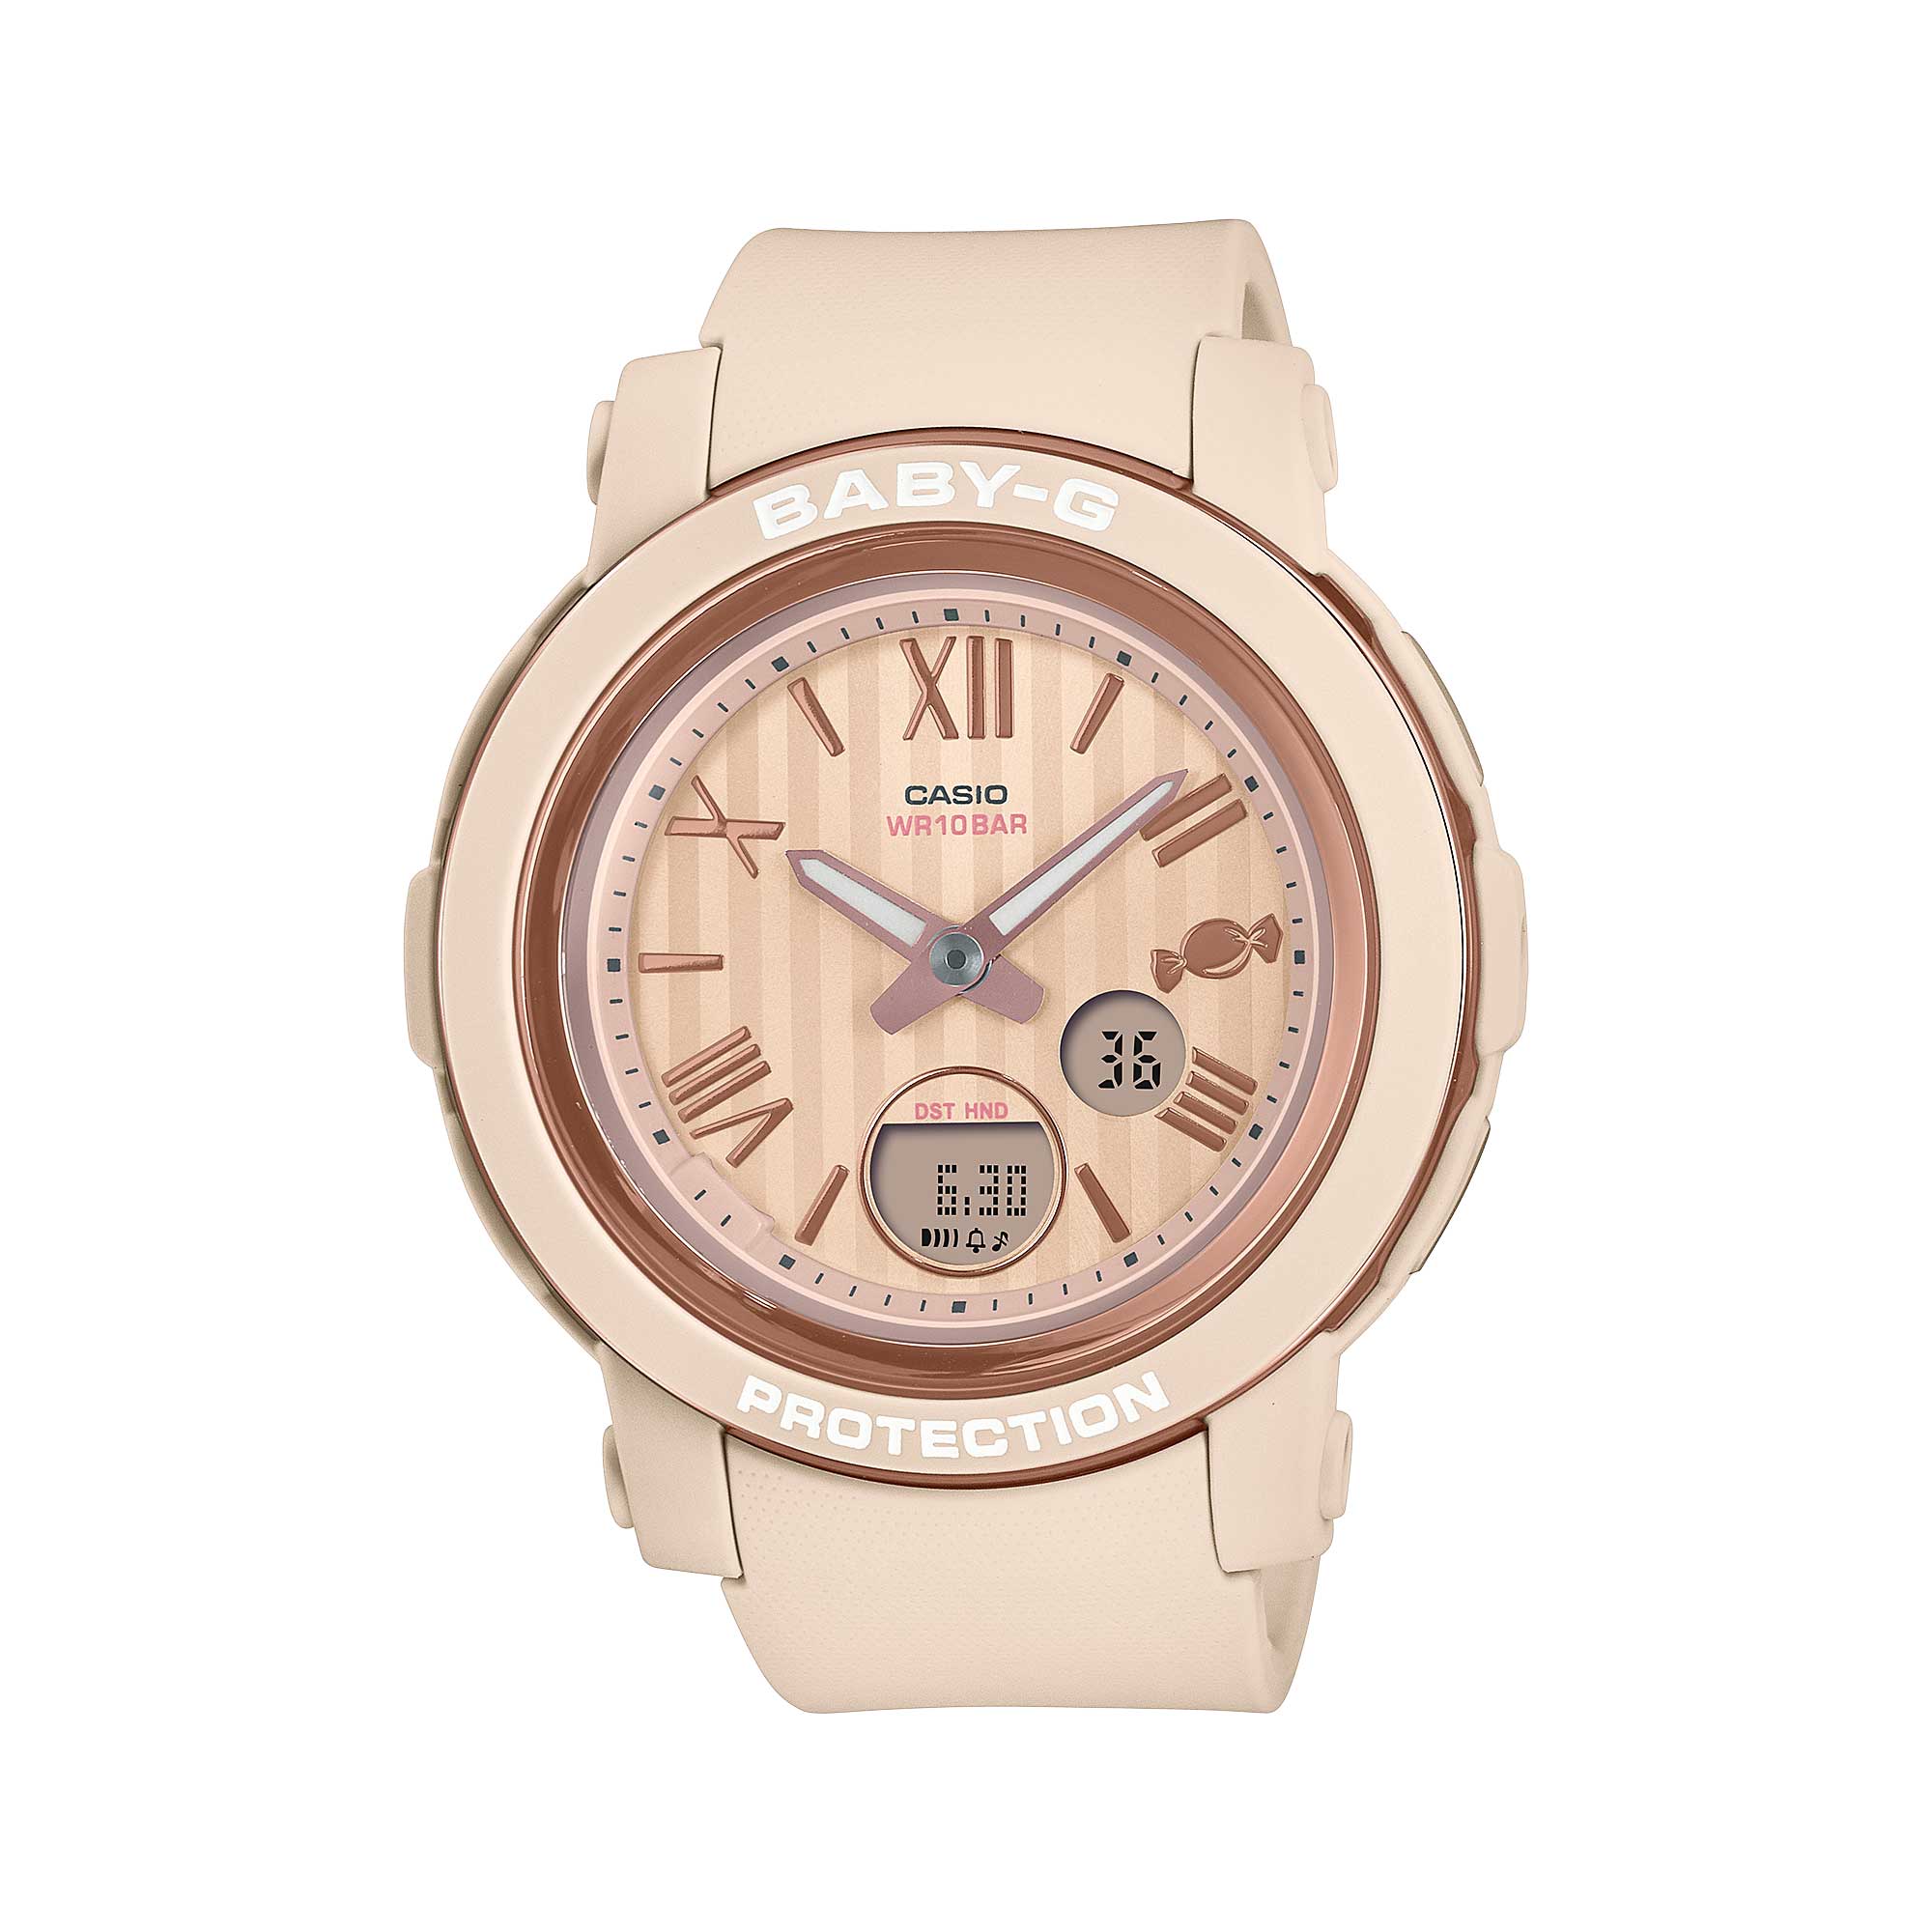 Casio Baby-G BGA-290 Lineup Sweets Collection Candy Coloured Beige Resin Band Watch BGA290SW-4A BGA-290SW-4A Watchspree